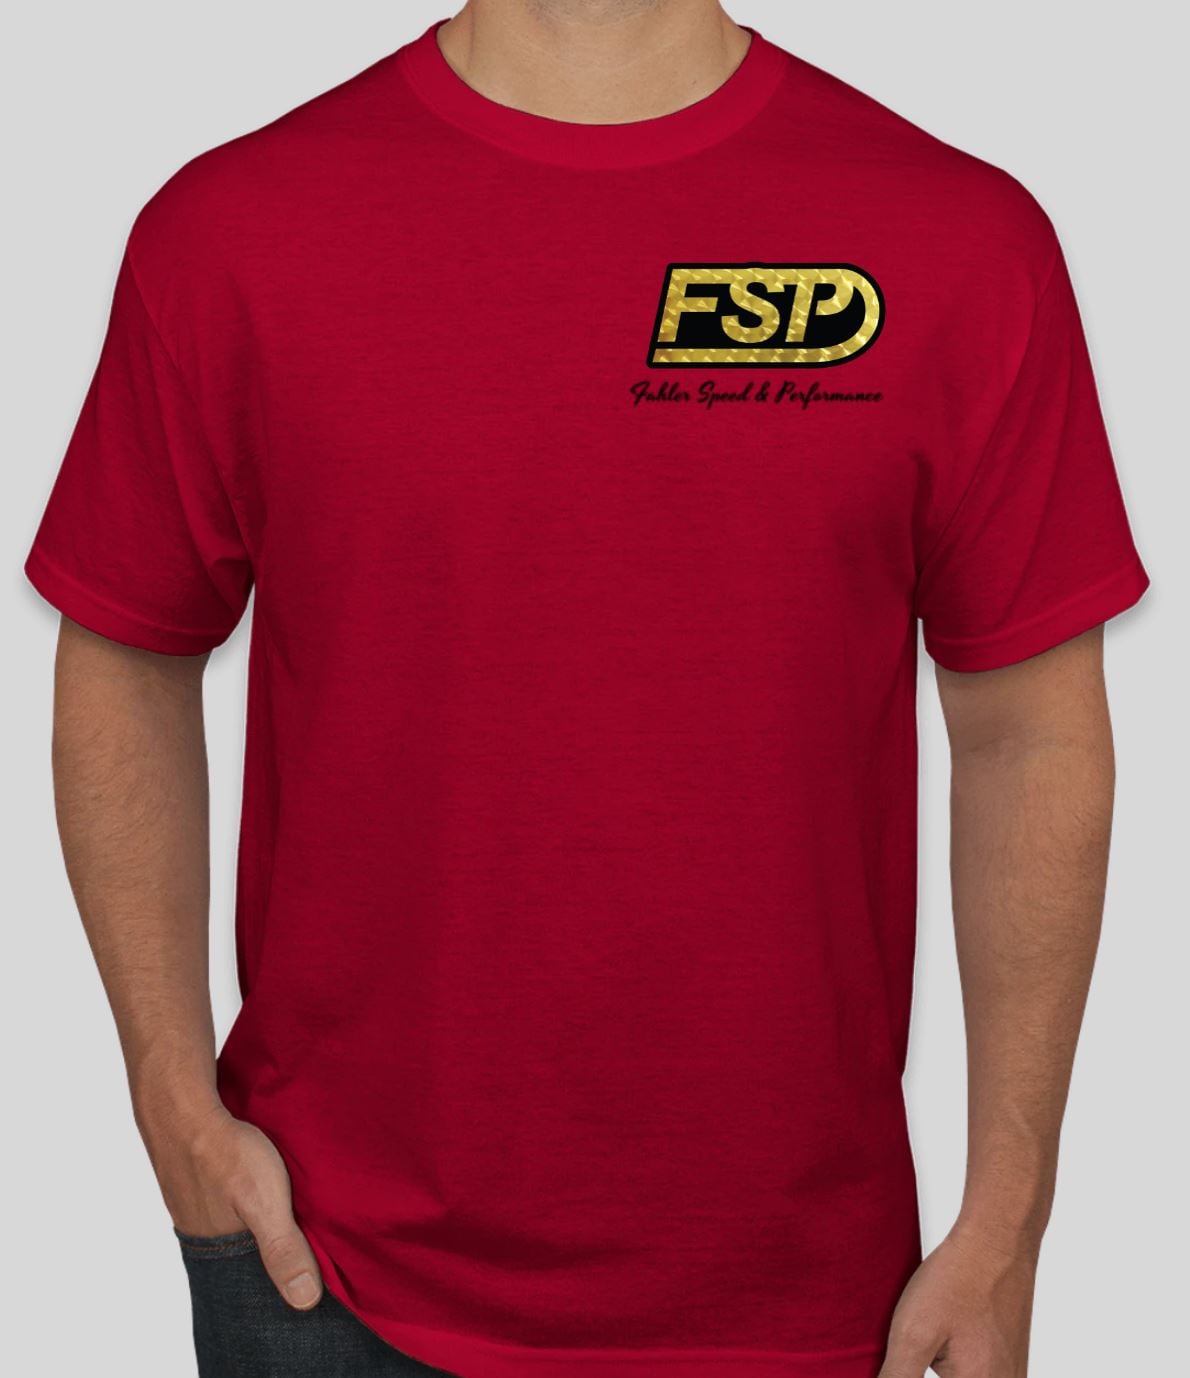 FSP "Burn Outs & Ice Cream" T-shirt